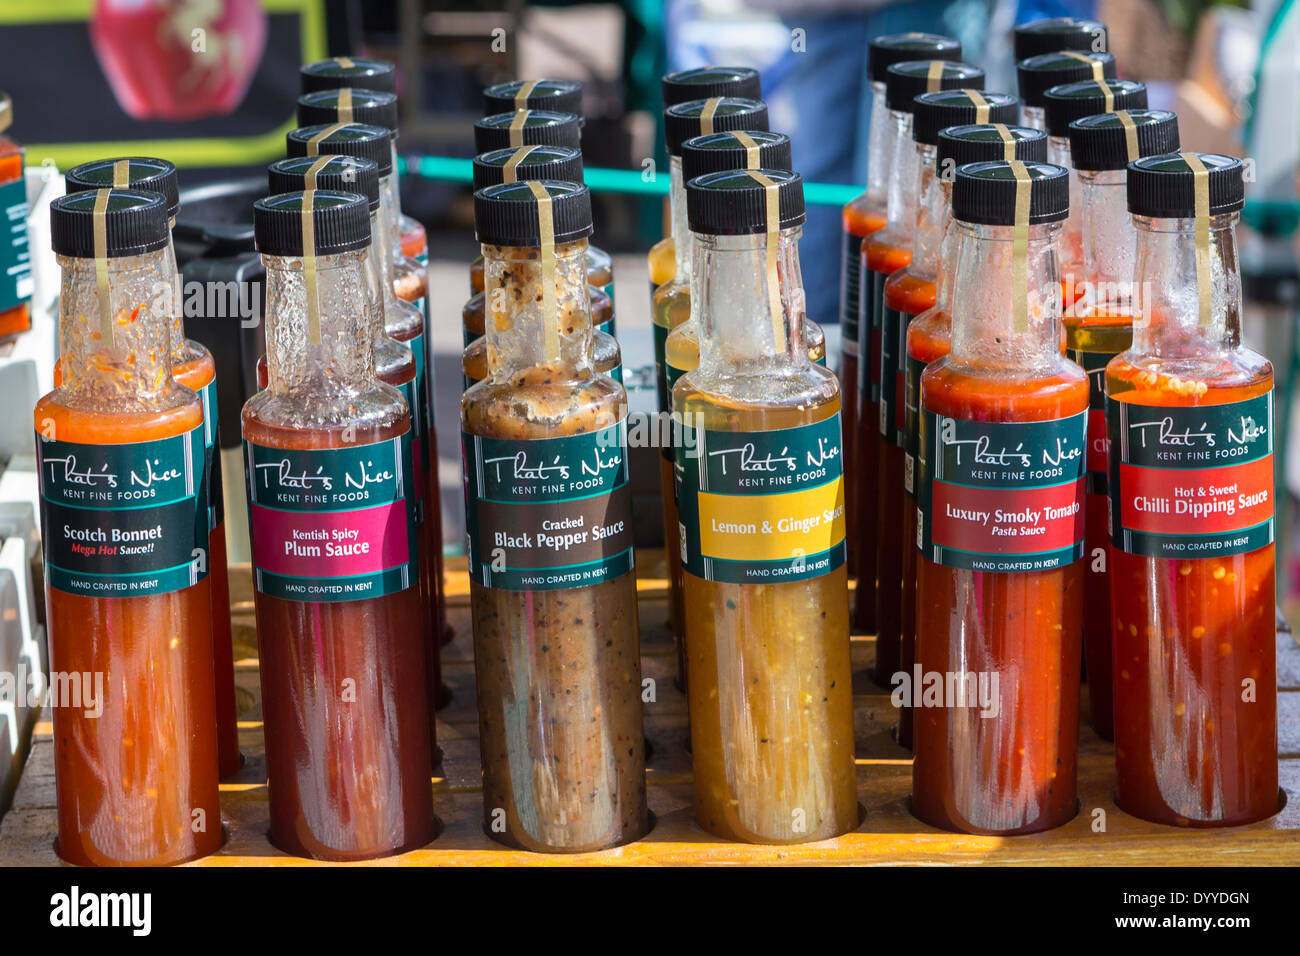 https://c8.alamy.com/comp/DYYDGN/bottles-of-hot-spices-and-sauces-made-by-kent-fine-foods-DYYDGN.jpg